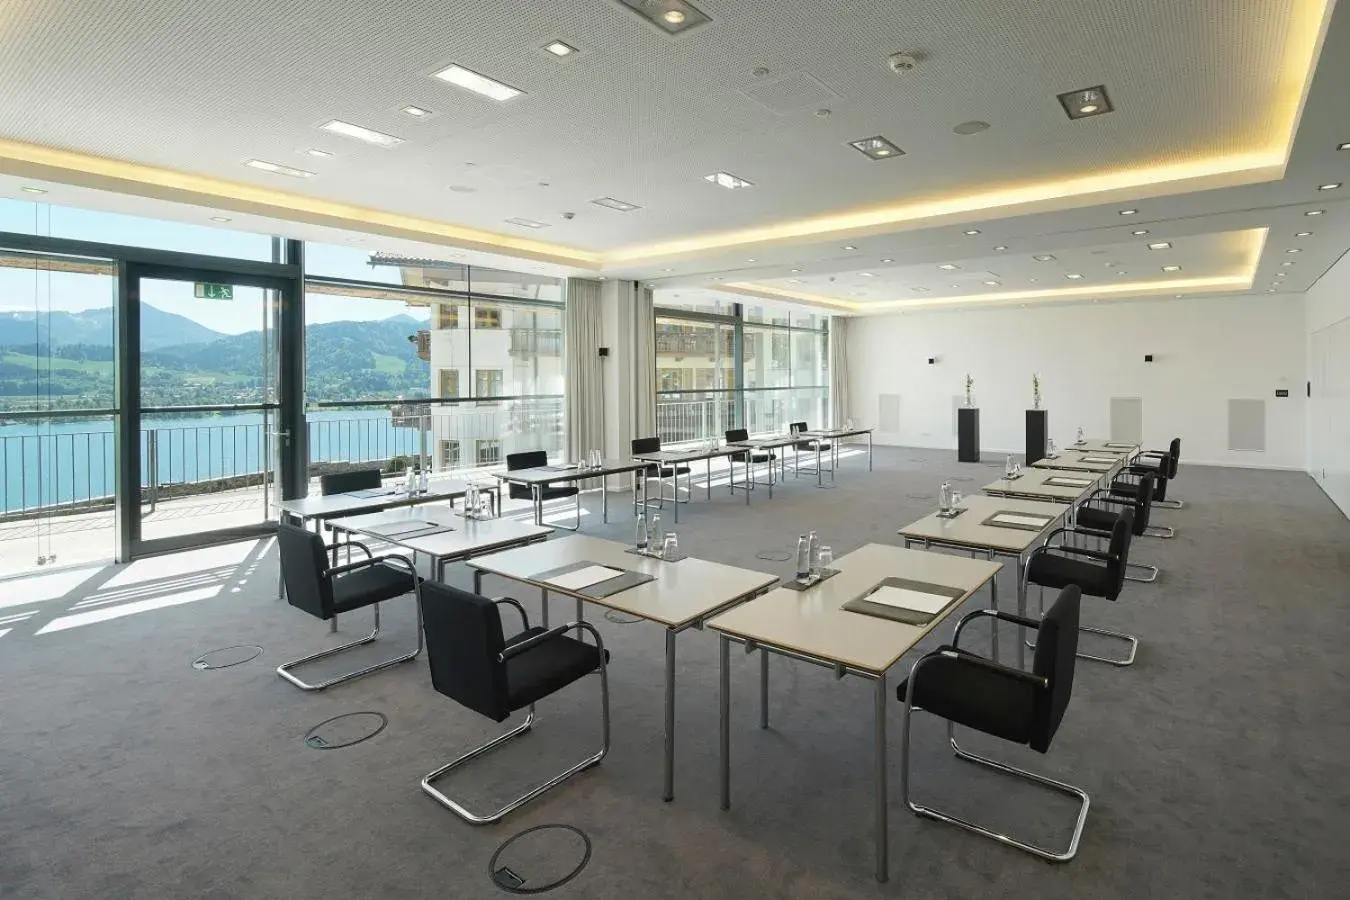 Business facilities in Das Tegernsee